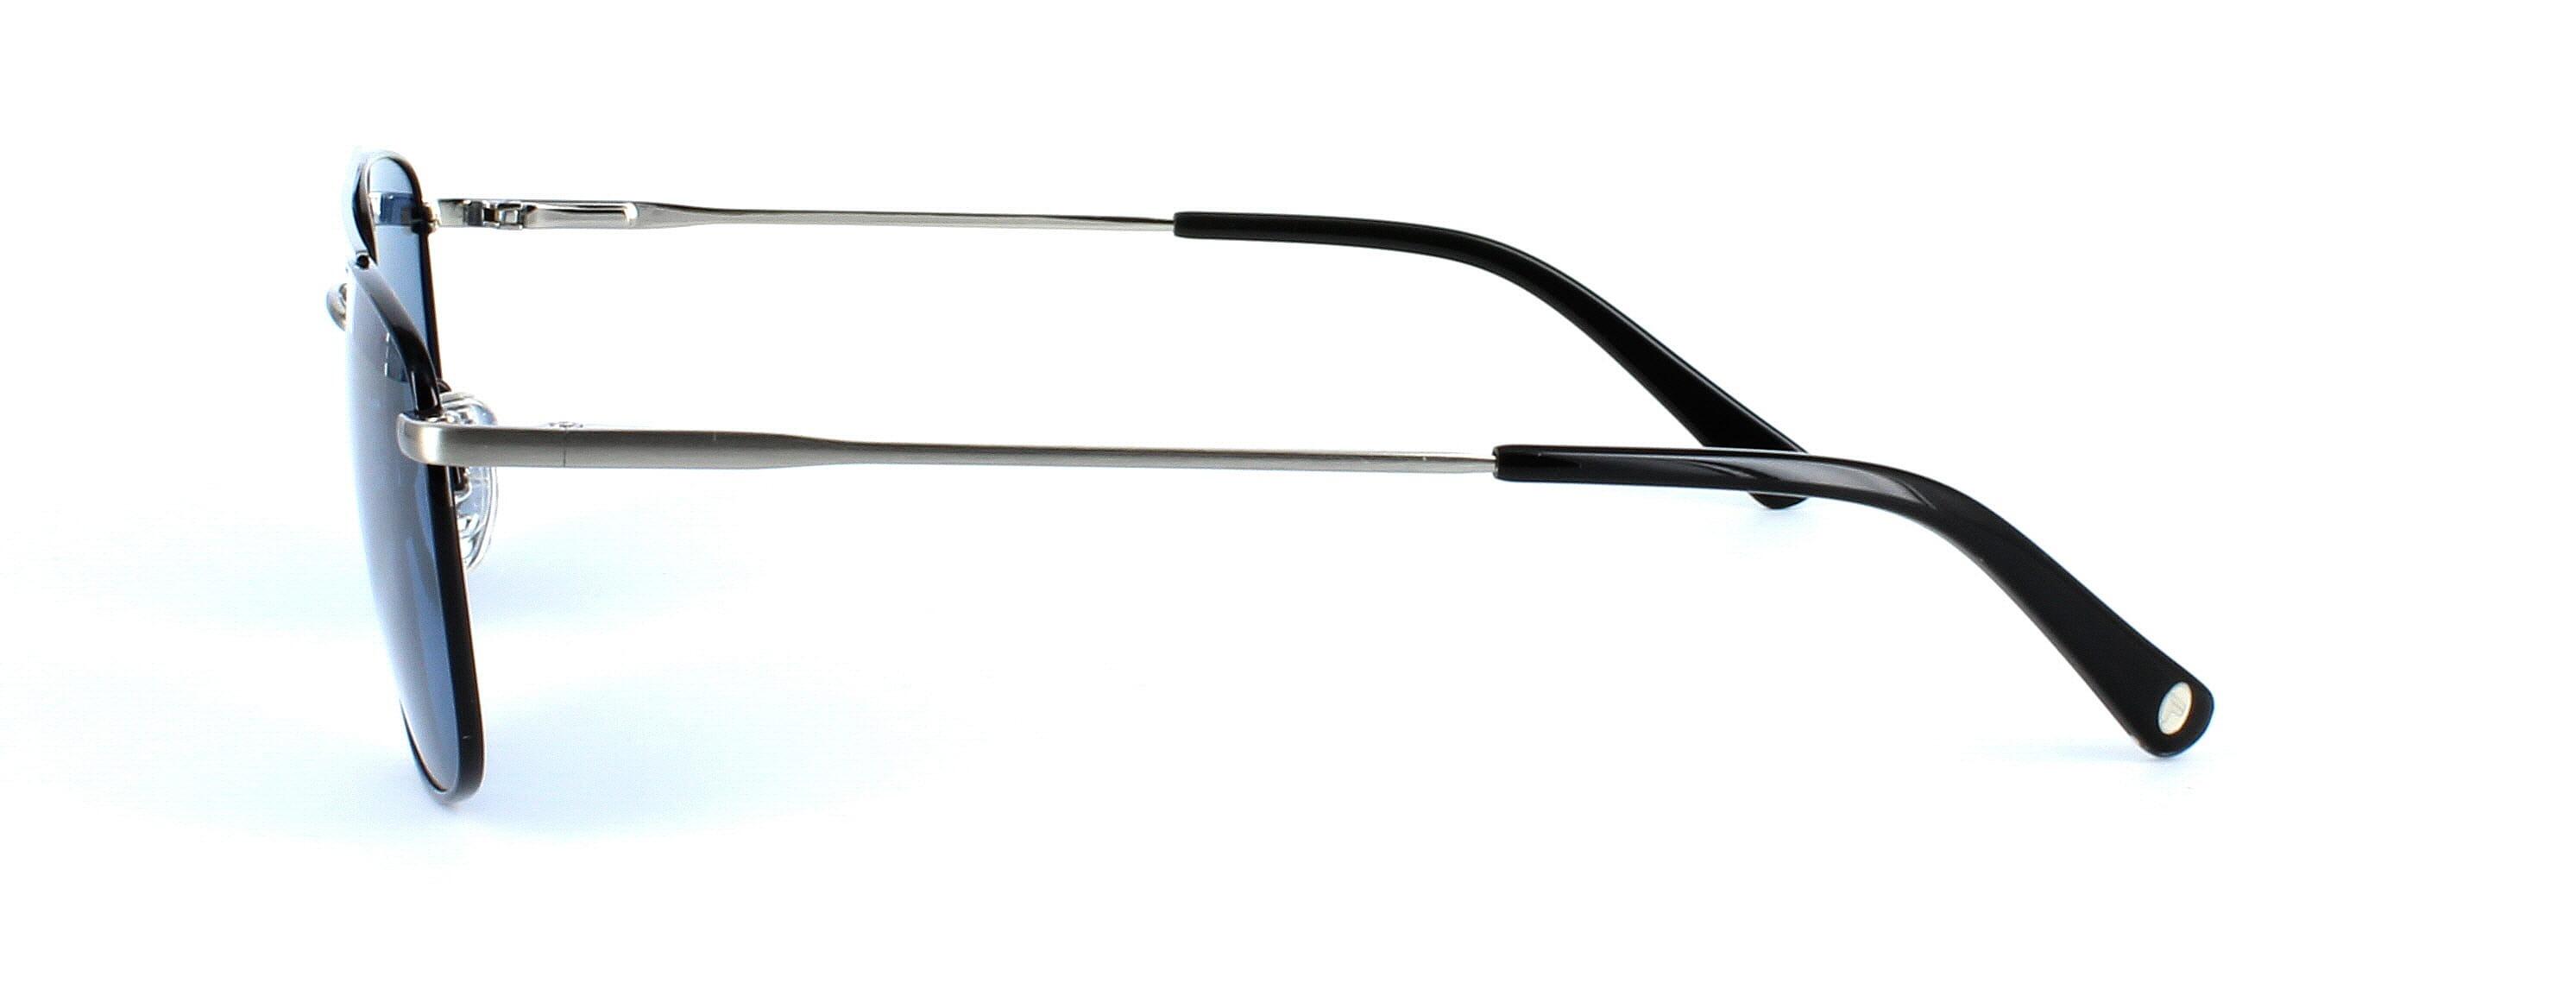 Carlo - Unisex 2-tone aviator style sunglasses here in black and silver - image view 1